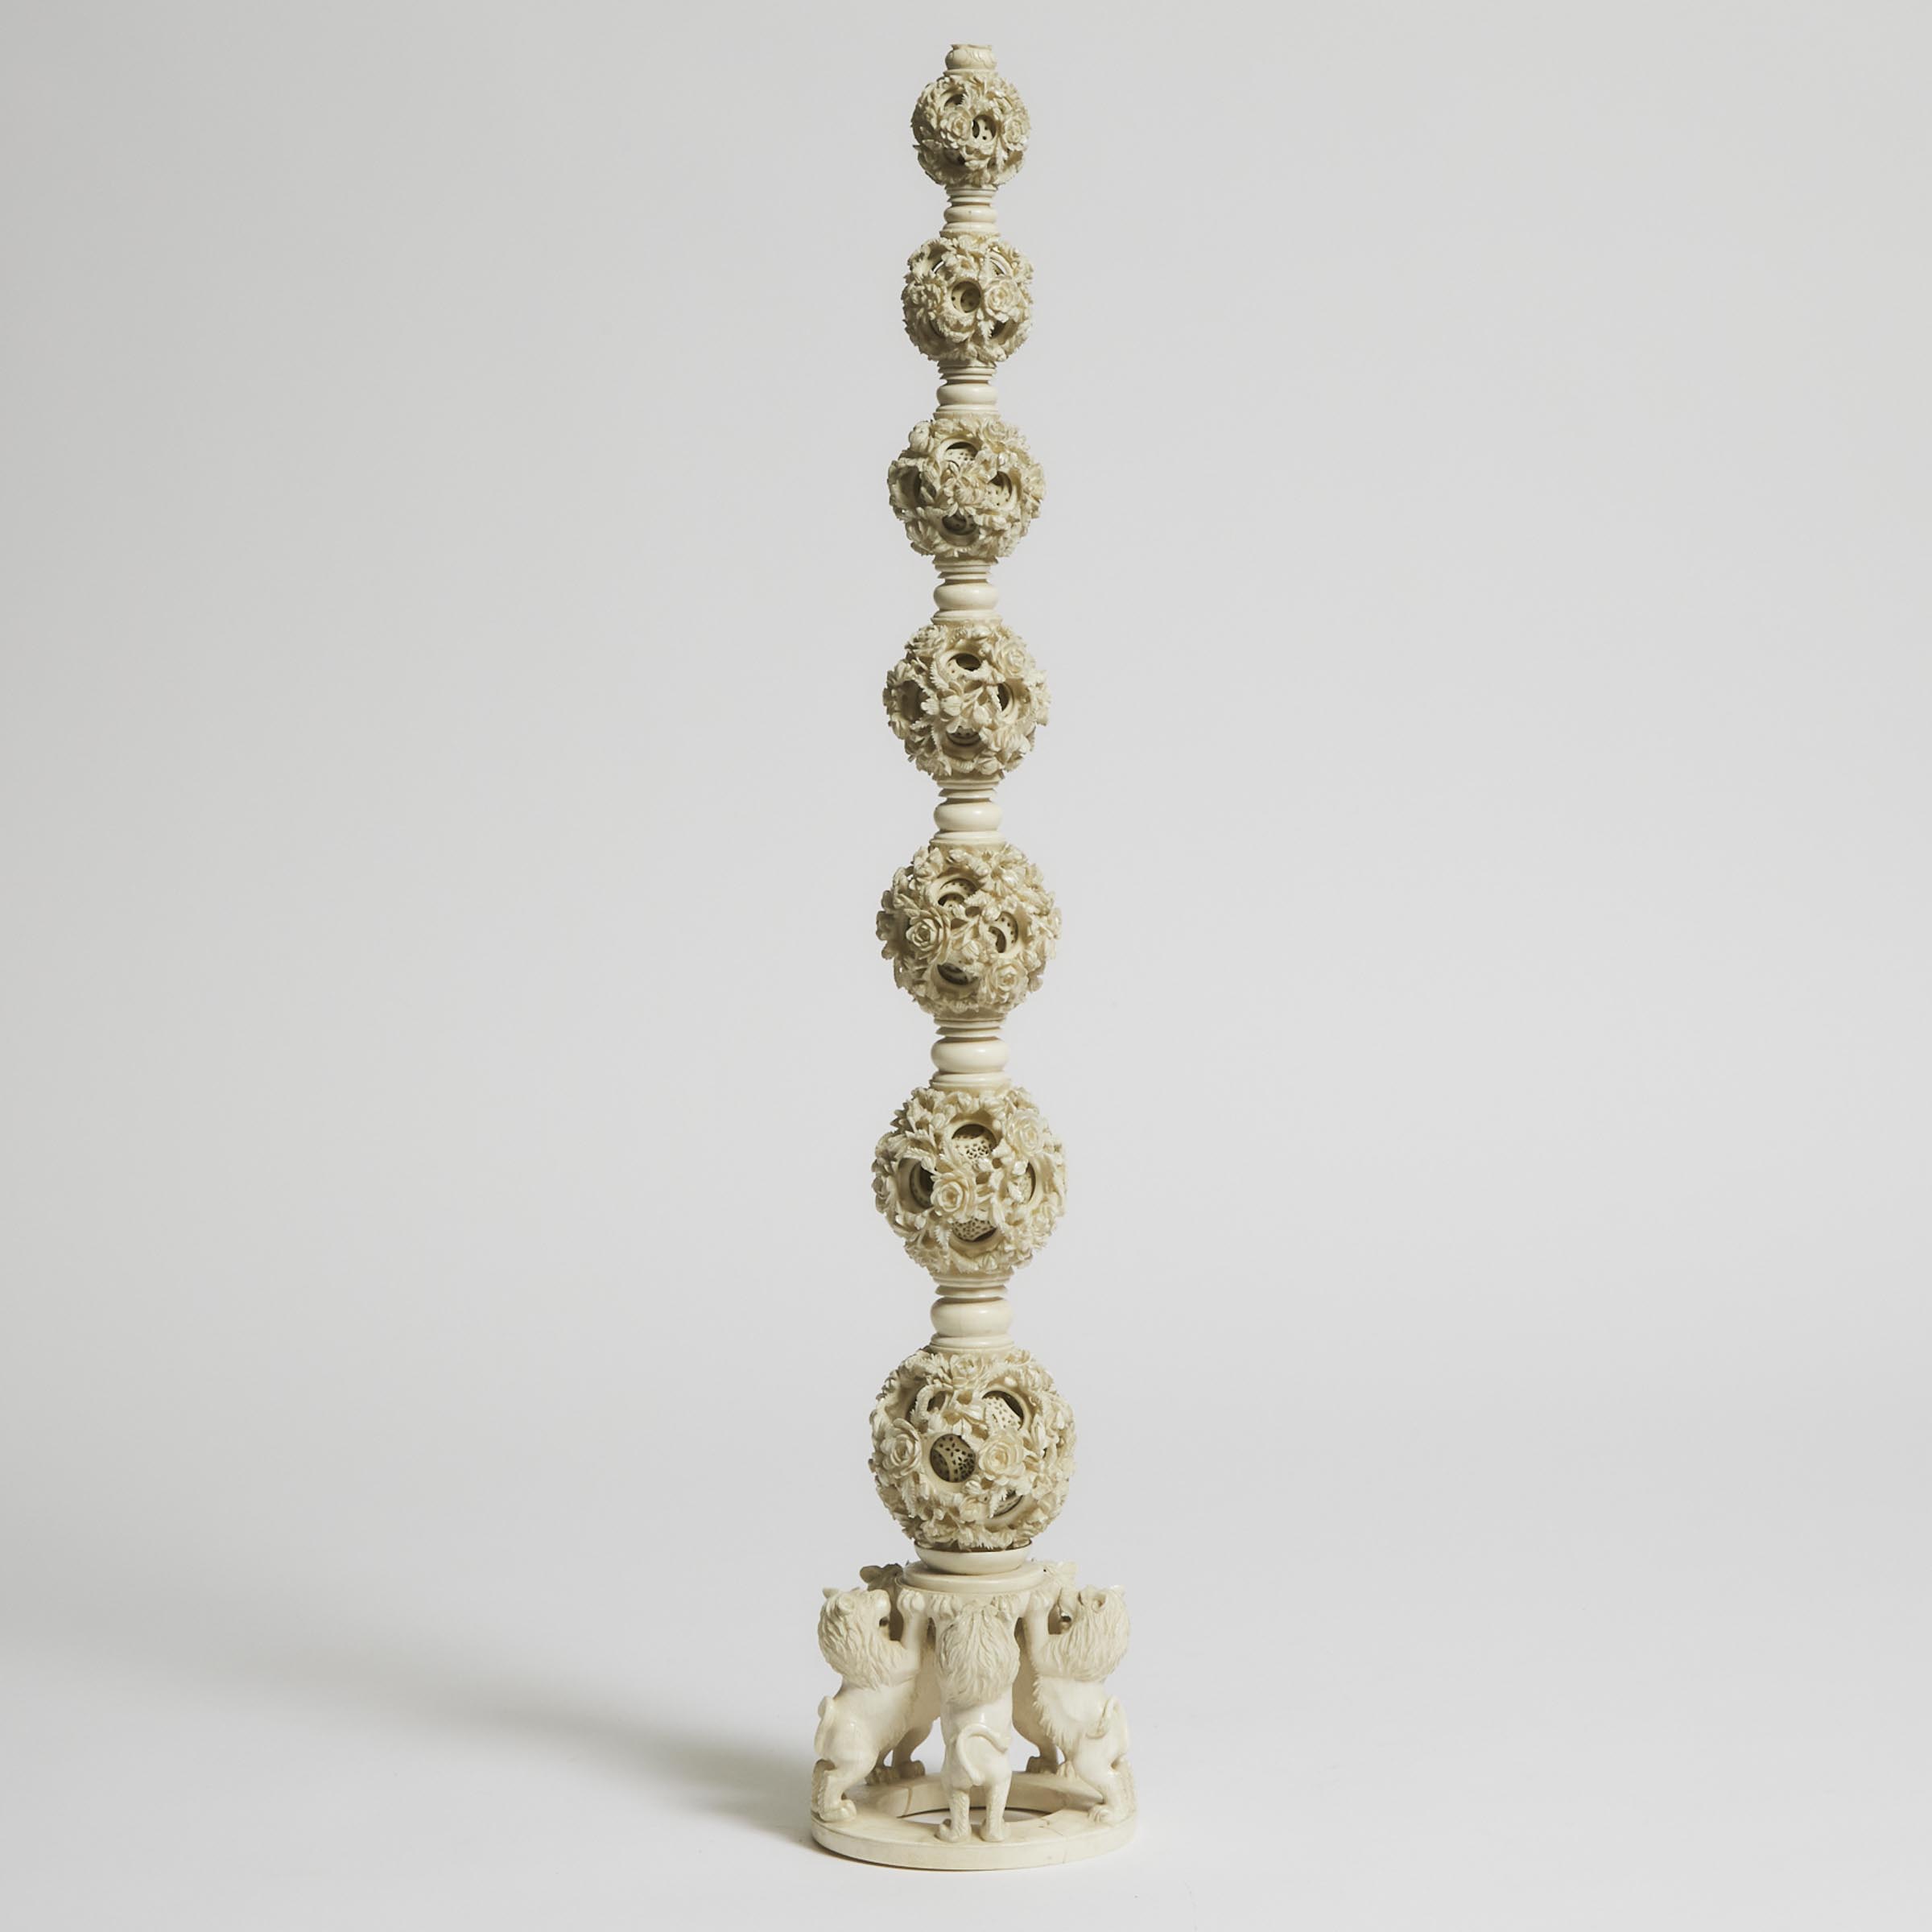 A Well-Carved Seven-Tiered Puzzle Ball